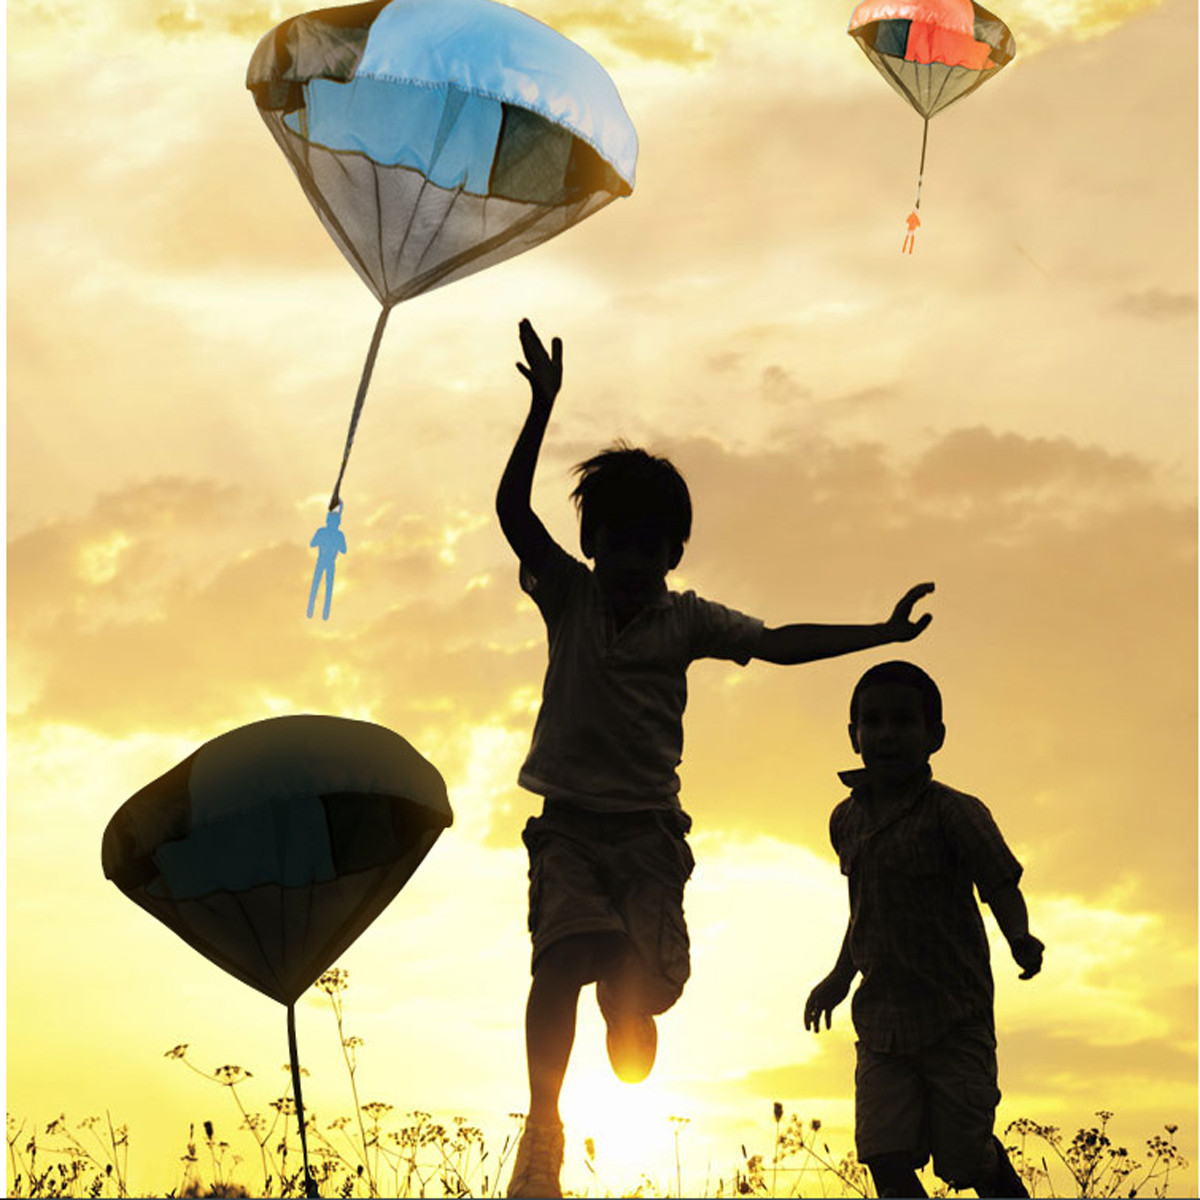 10PCS-Kids-Children-Tangle-Free-Toy-Hand-Throwing-Parachute-Kite-Outdoor-Play-Game-Toy-1366682